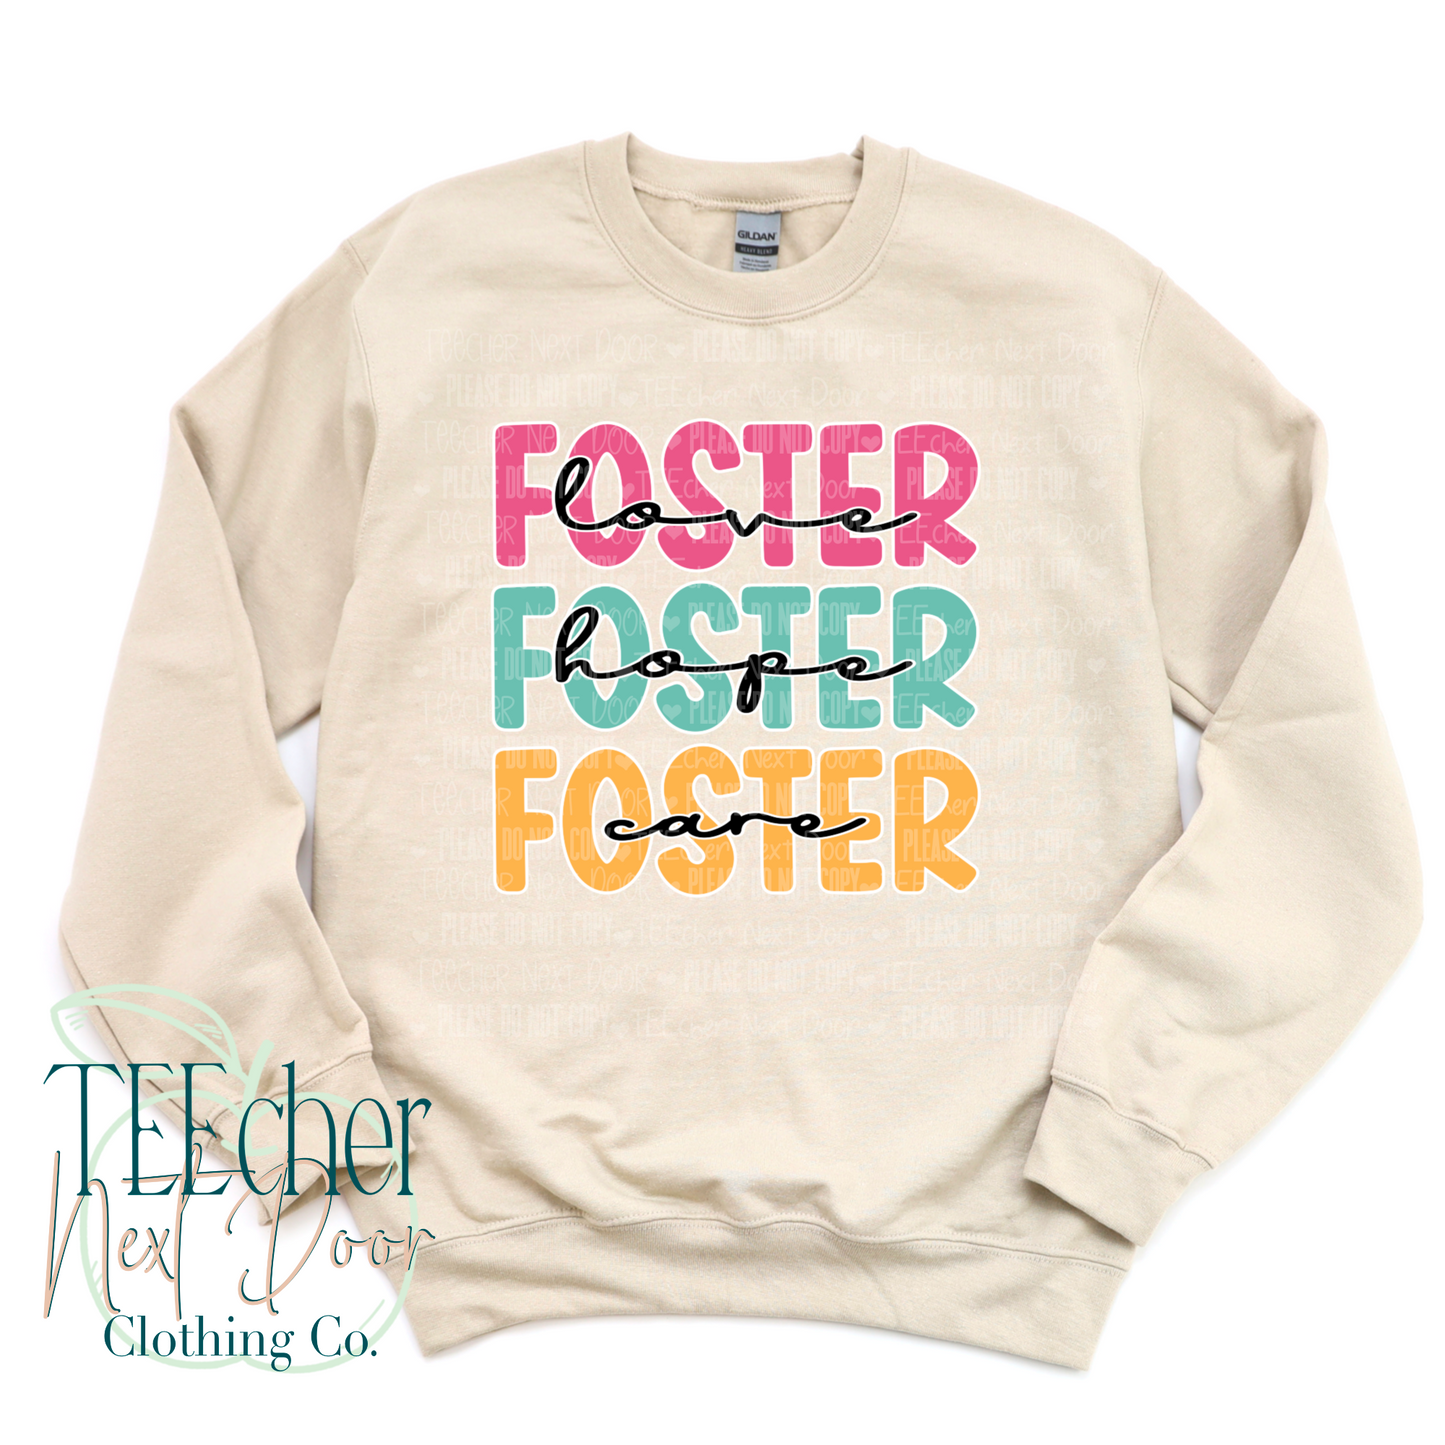 EXCLUSIVE Foster Love, Hope, Care